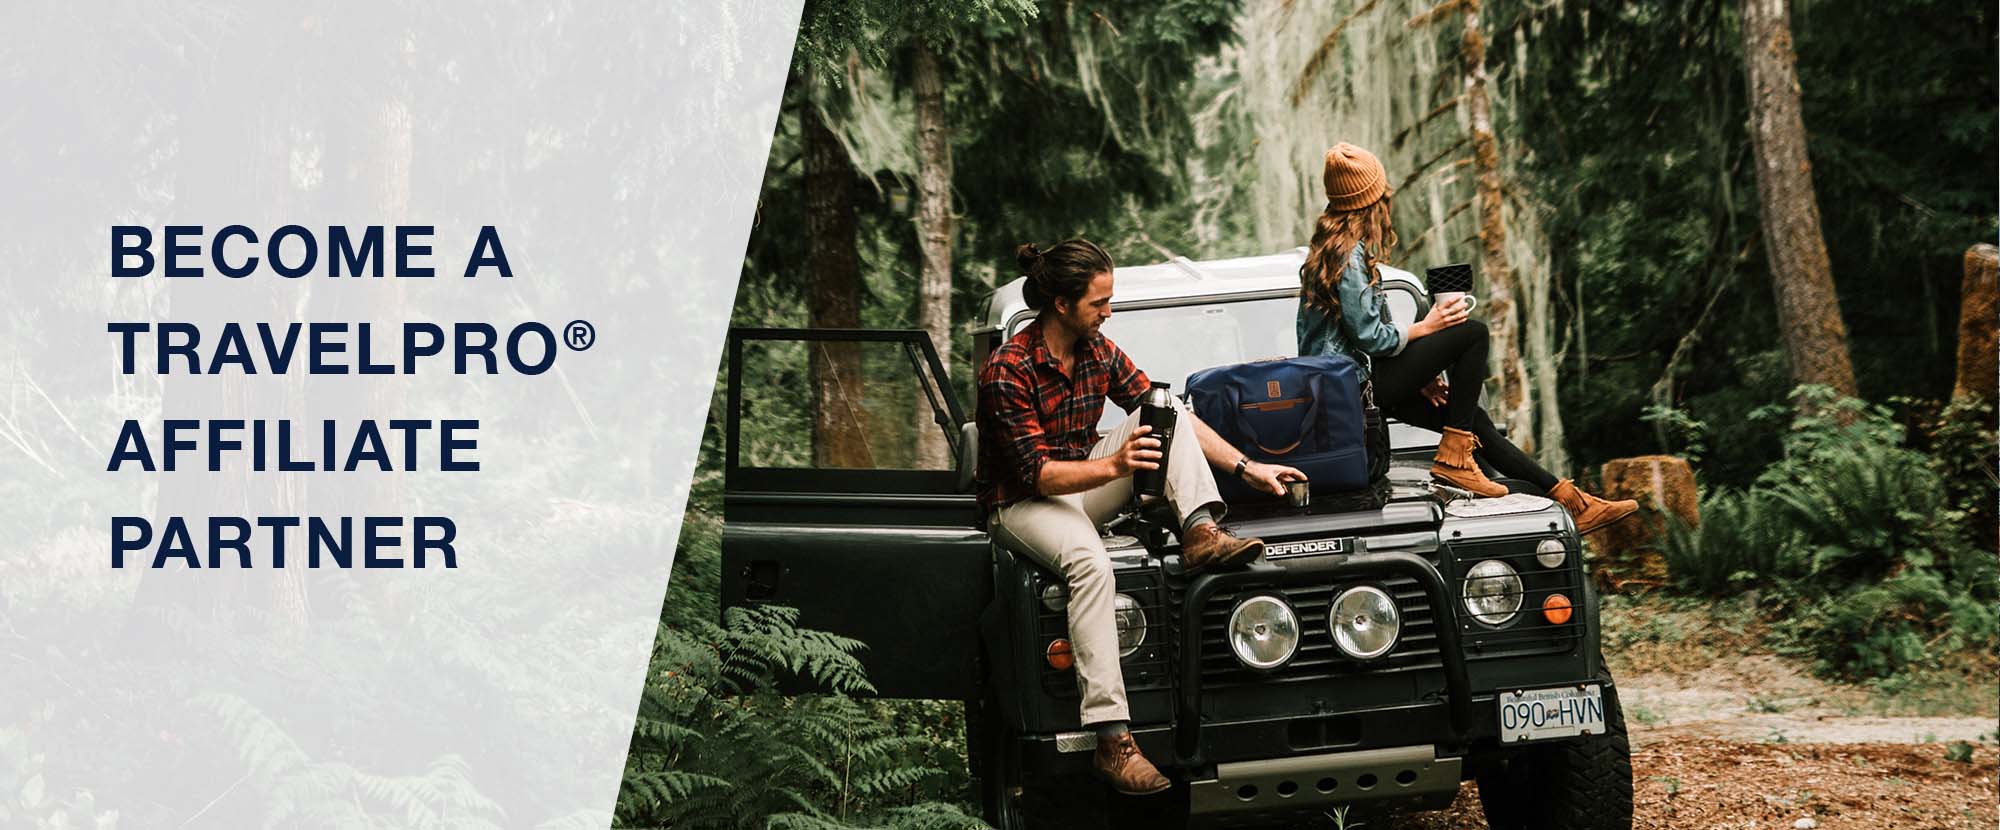 Banner with man and woman sitting on SUV with text Become a Travelpro Affiliate Partner